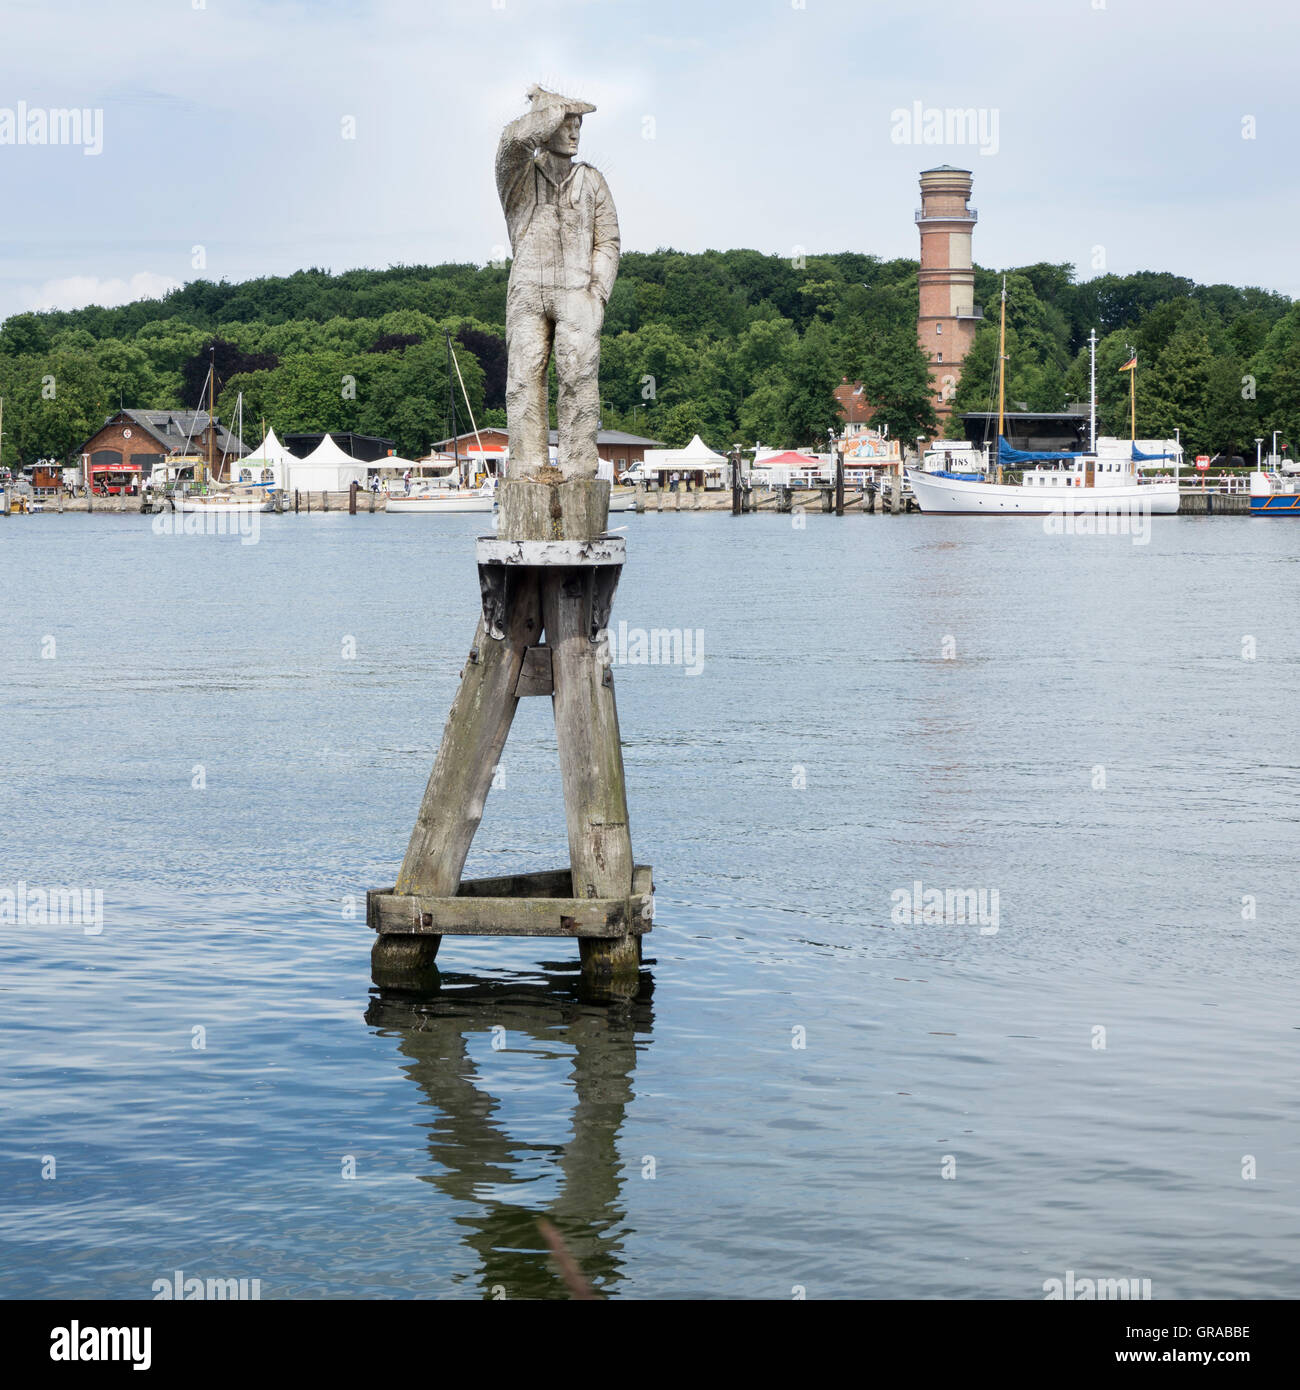 Grabbe High Resolution Stock Photography and Images - Alamy